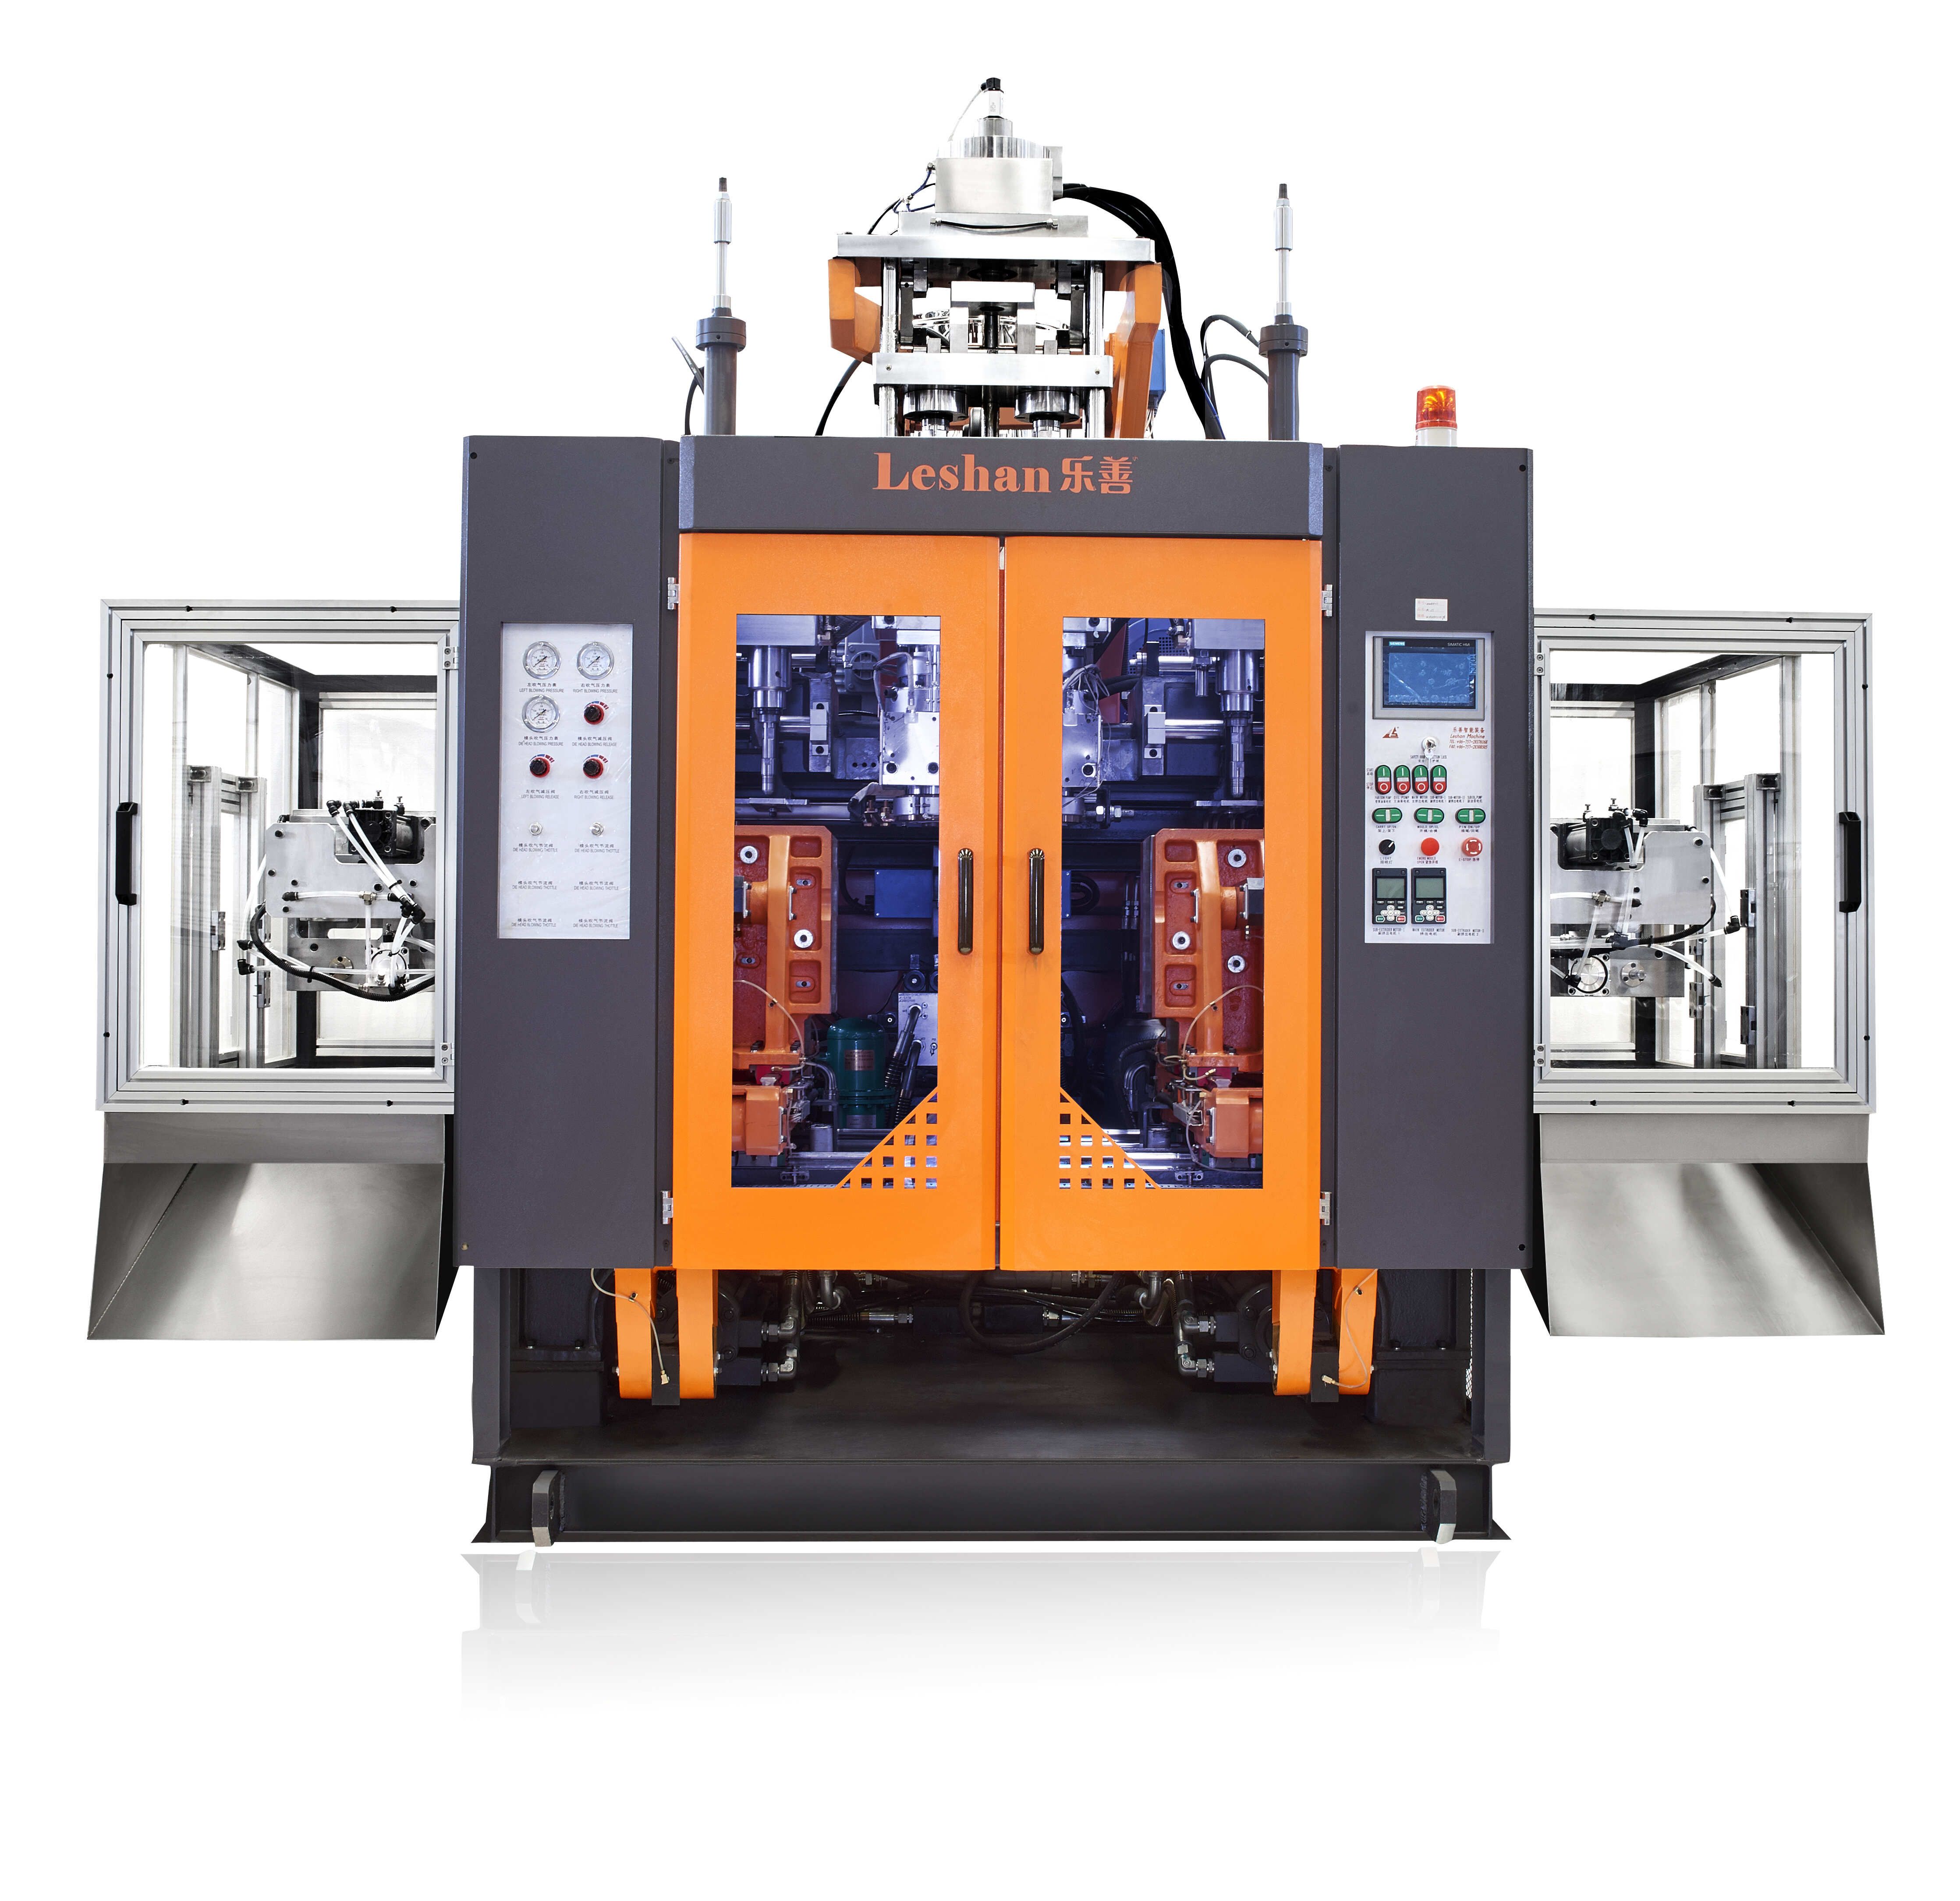 What are the advantages of Leshan blow molding machine?